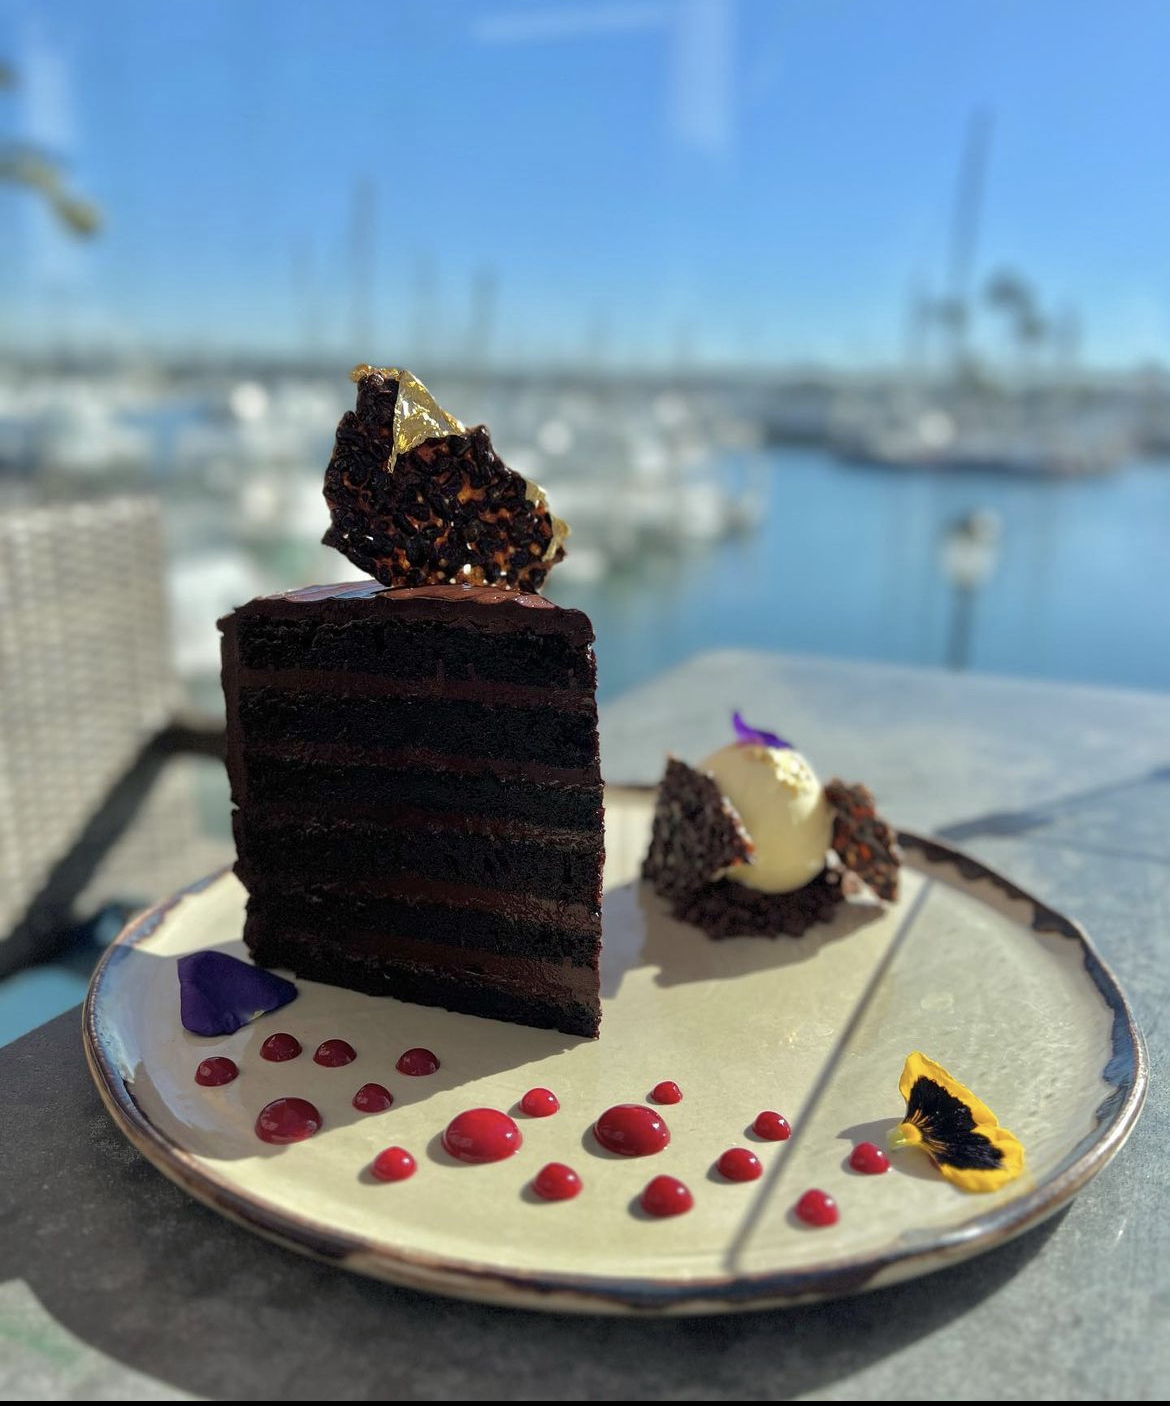 slice of chocolate cake on a plate overlooking harbor and boats